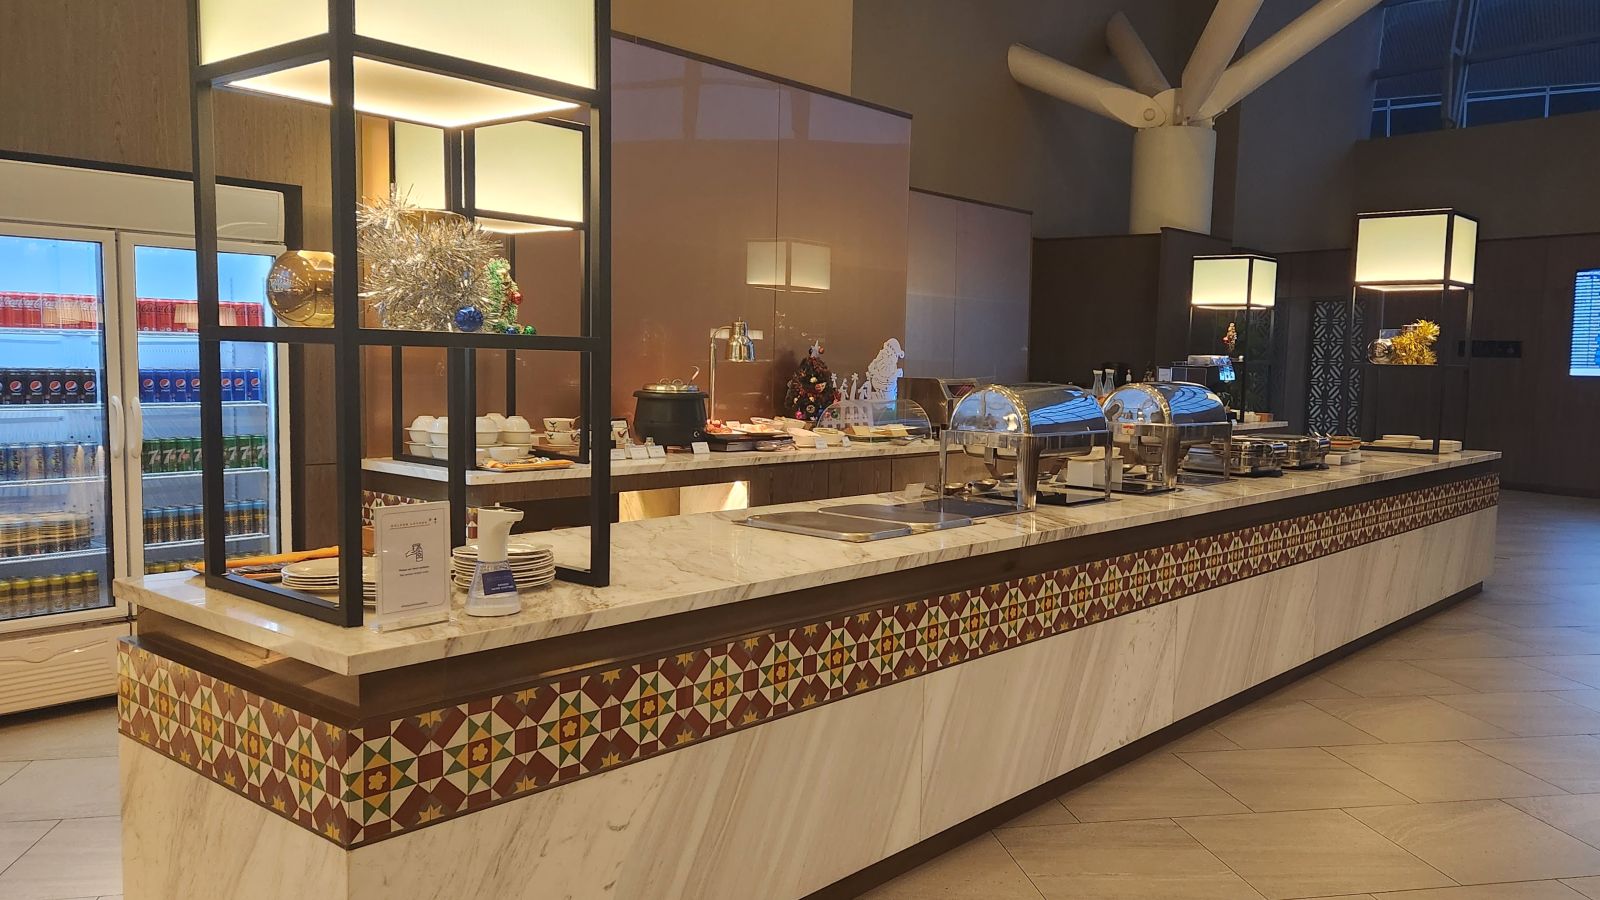 Malaysia Airlines Golden Lounge KLIA buffet